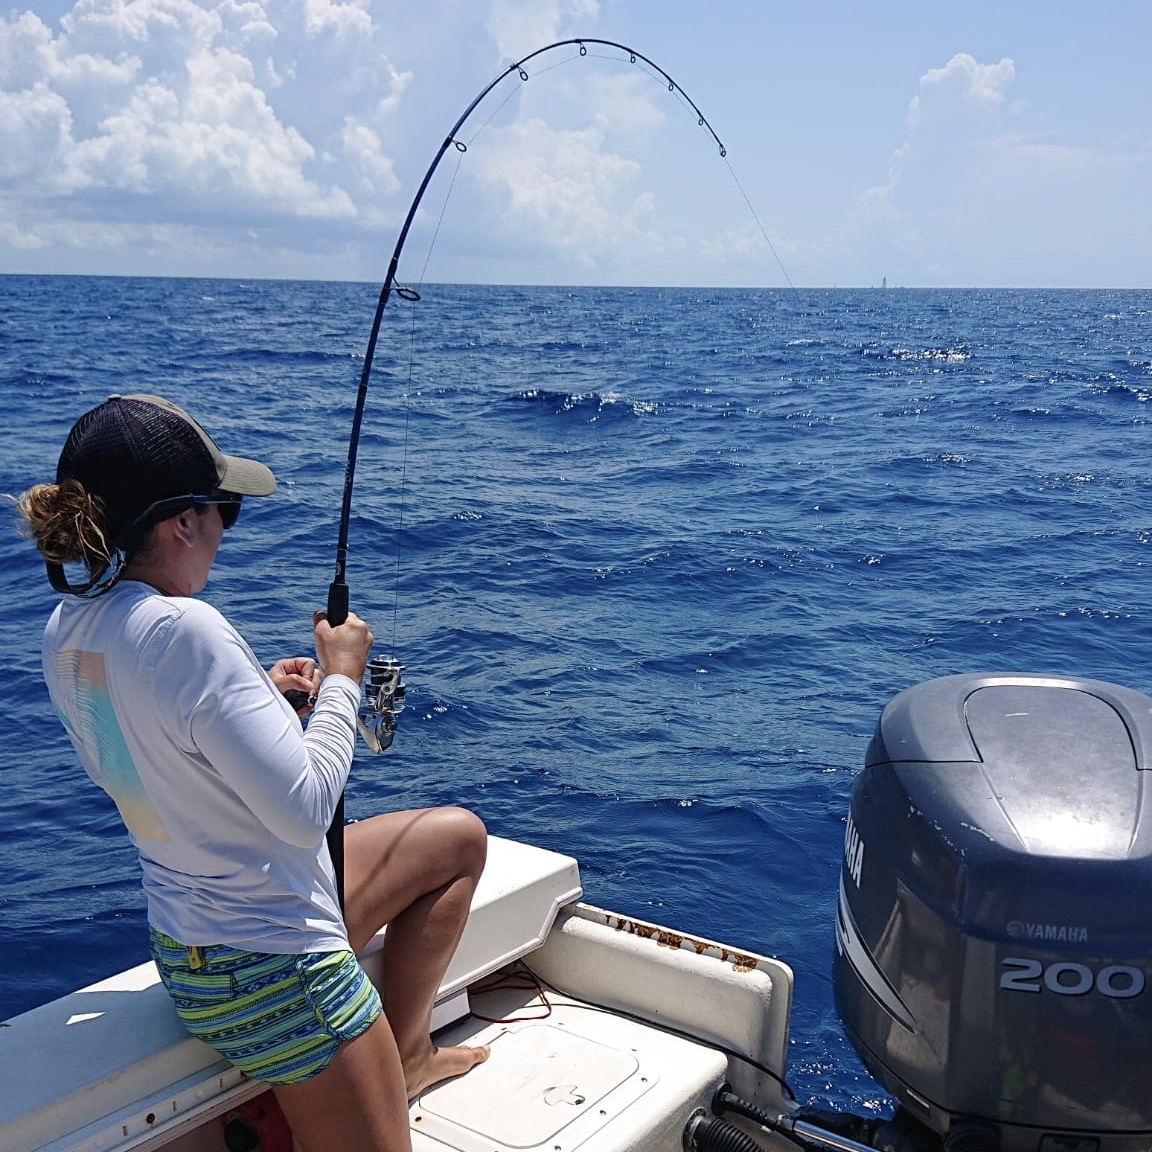 Reeling in a permit (Trachinotus falcatus) so I can collect measurements and tissue samples. This project aimed to quantify shark depredation rates in the Florida Keys. PC: Kirk Gastrich